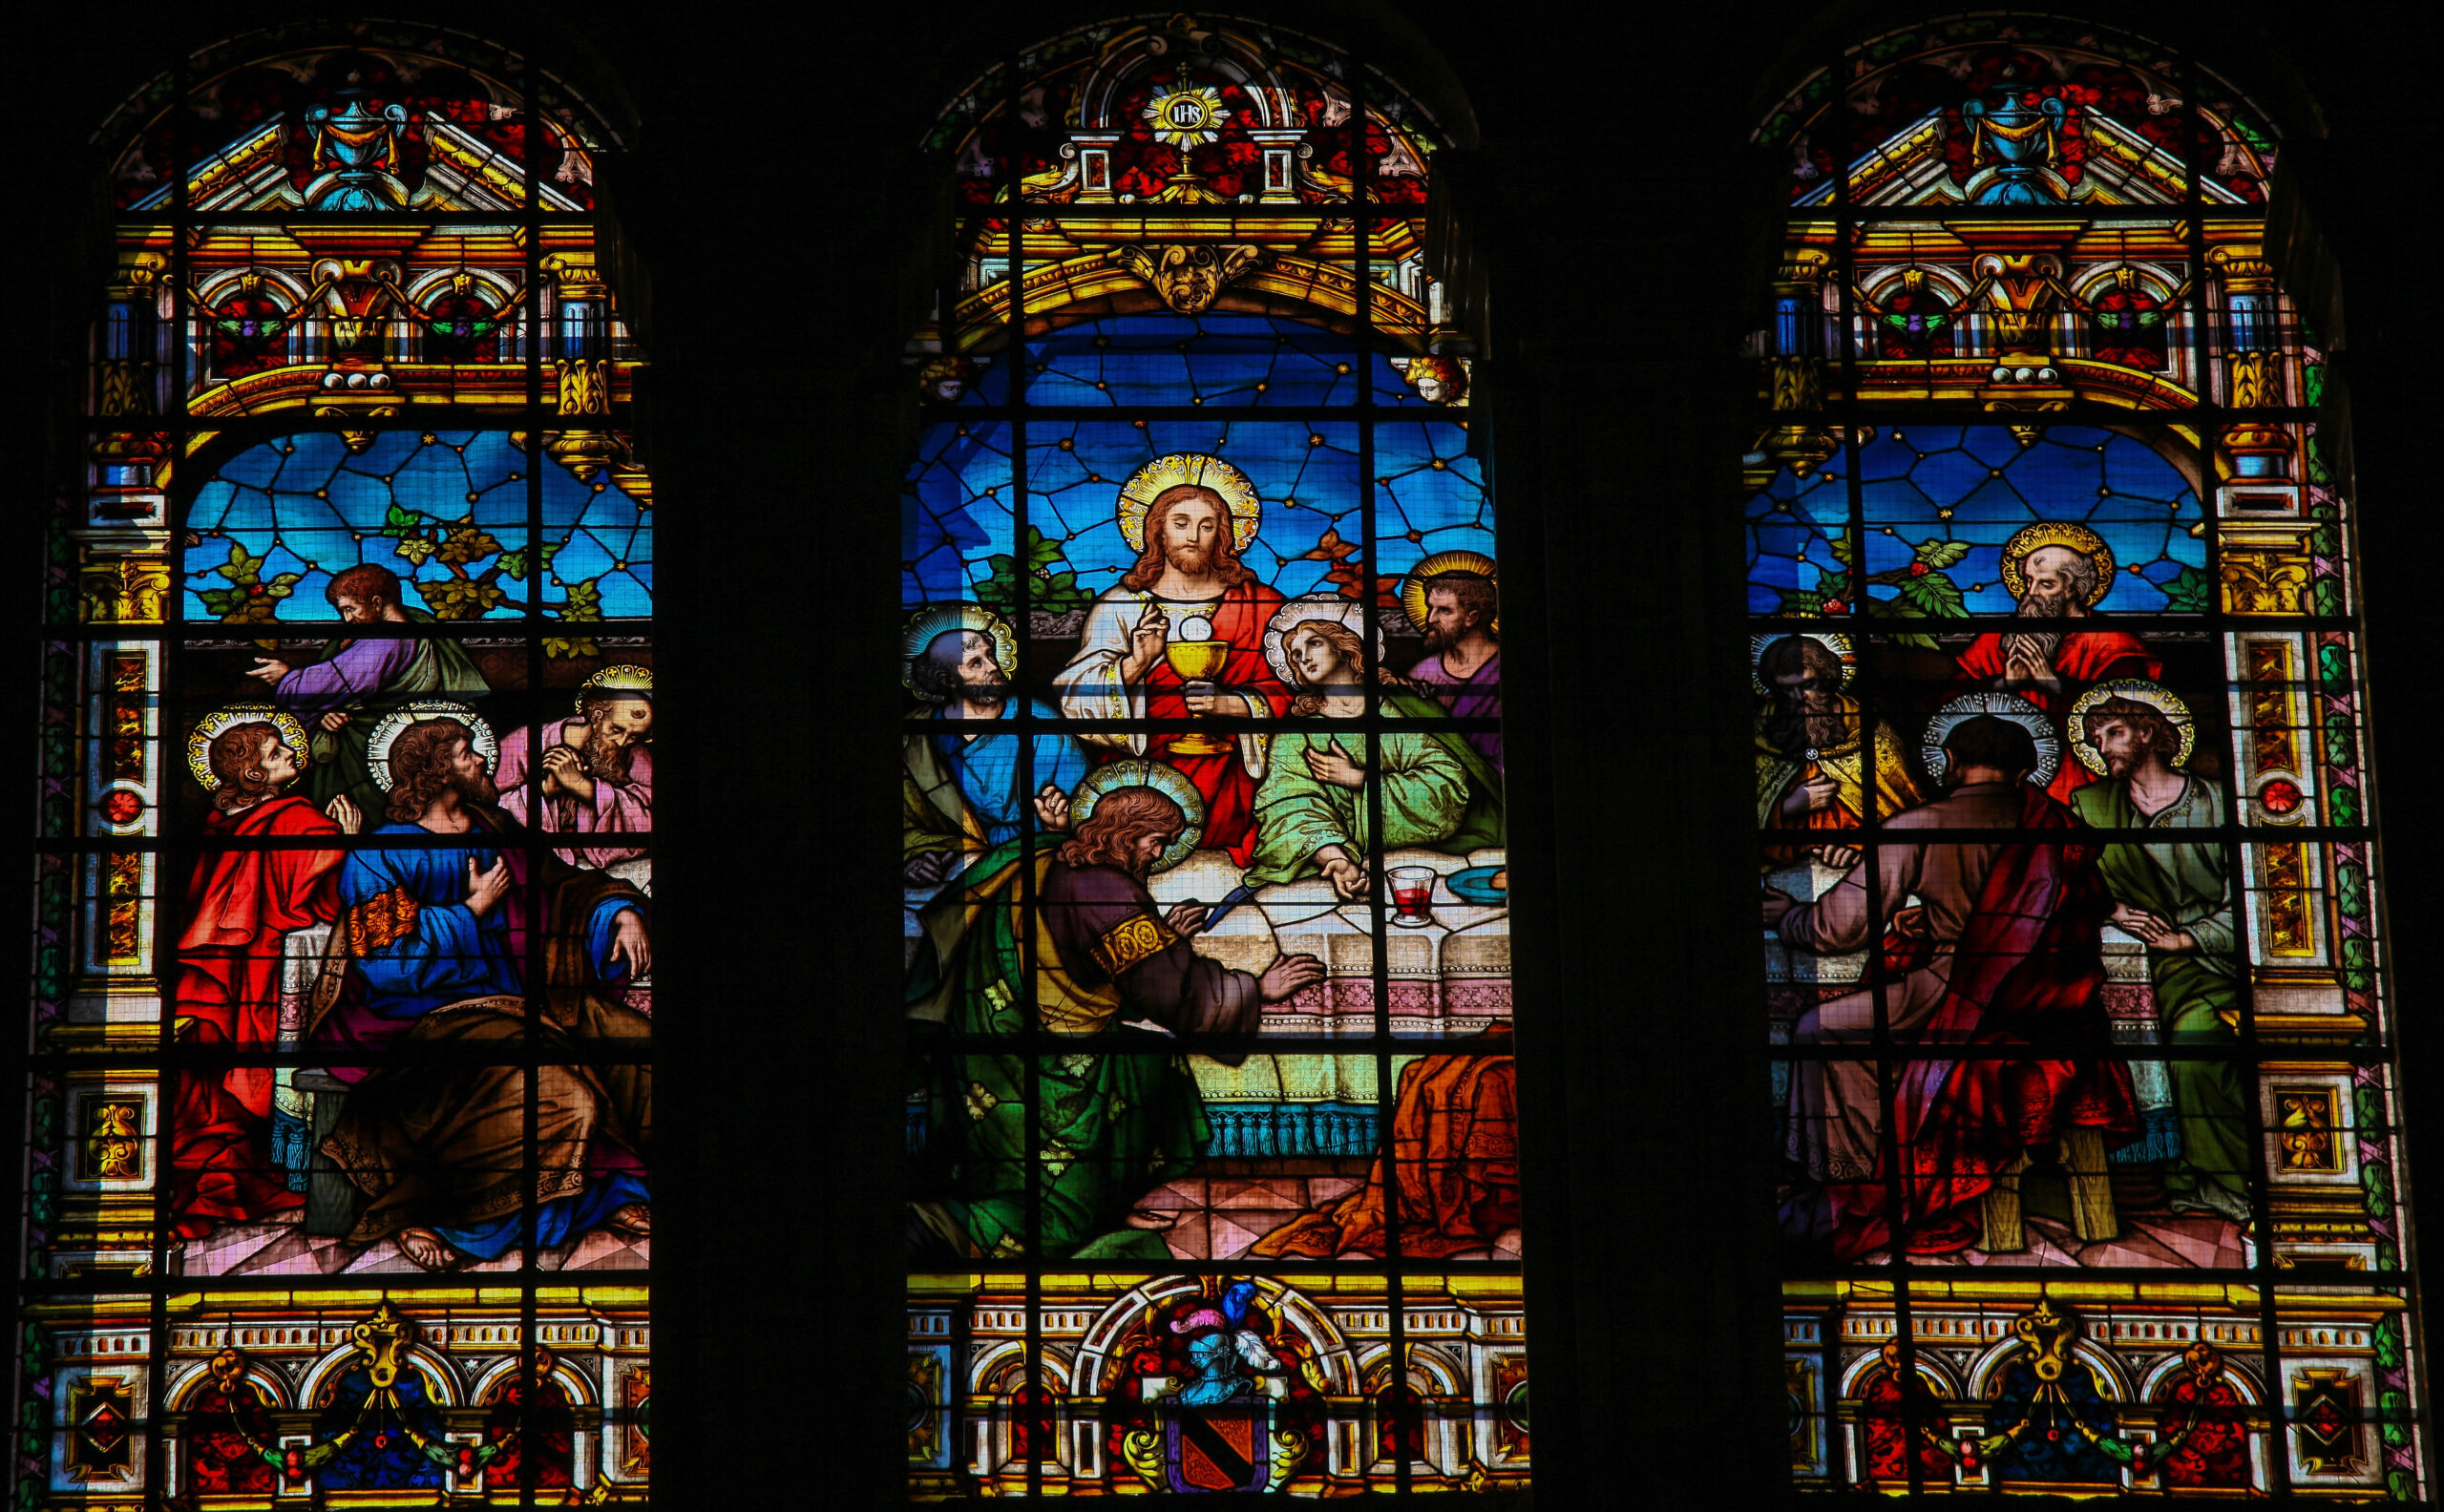 Stained glass window depicting the Last Supper